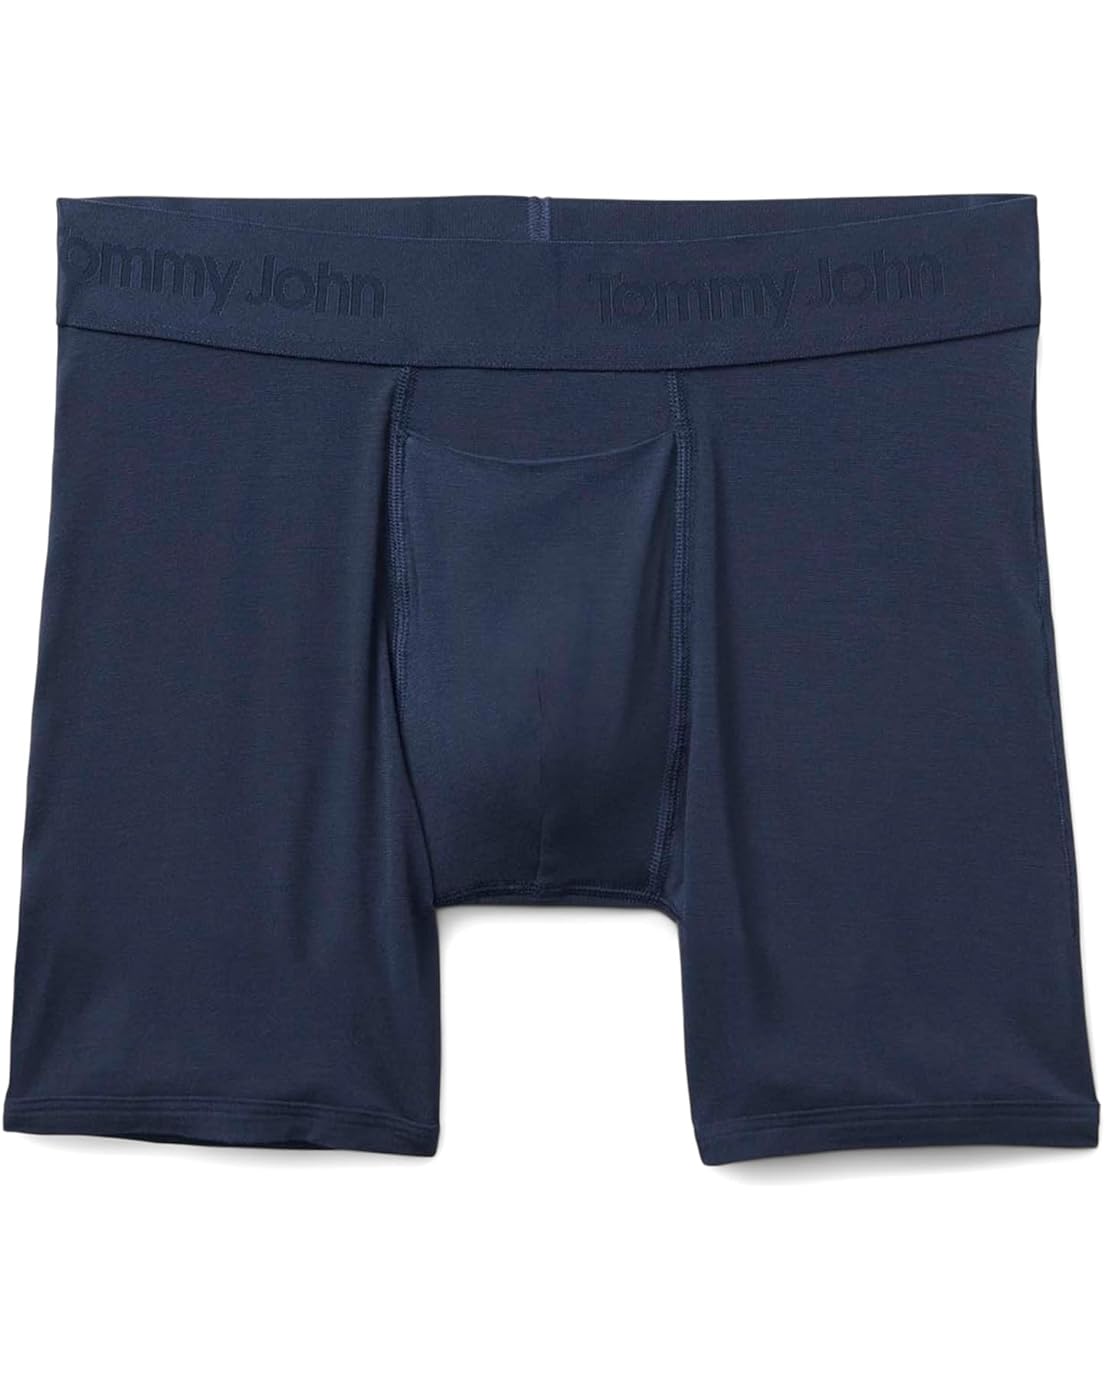  Tommy John Second Skin Mid-Length Boxer Brief 6